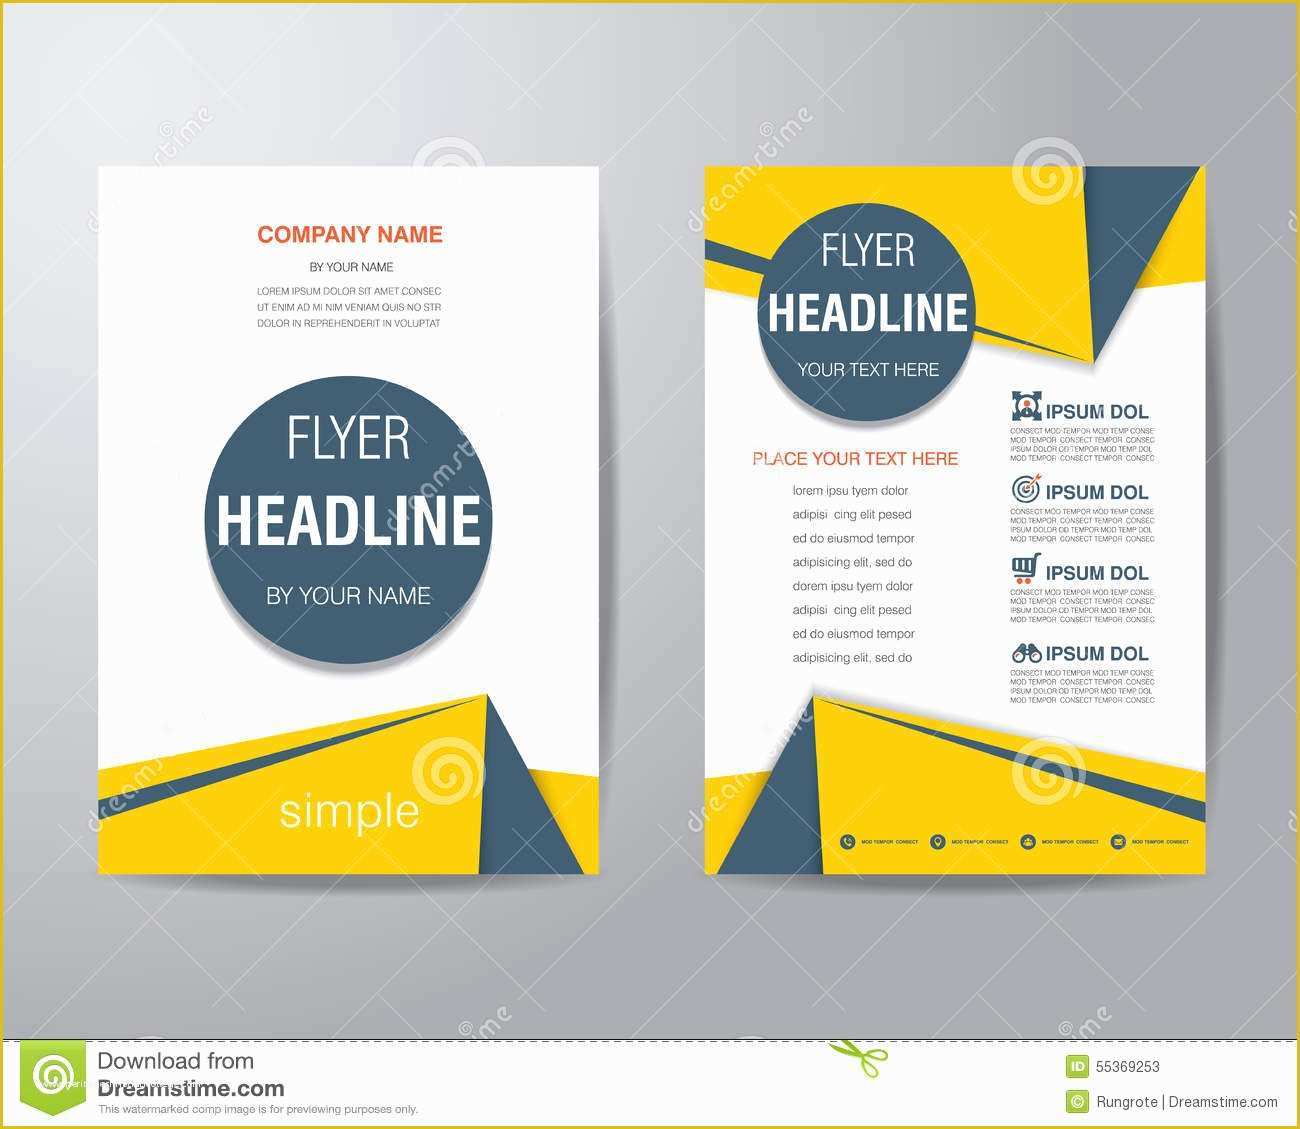 Graphic Flyer Templates Free Of Flyer Design Layout Yourweek 39ea0ceca25e